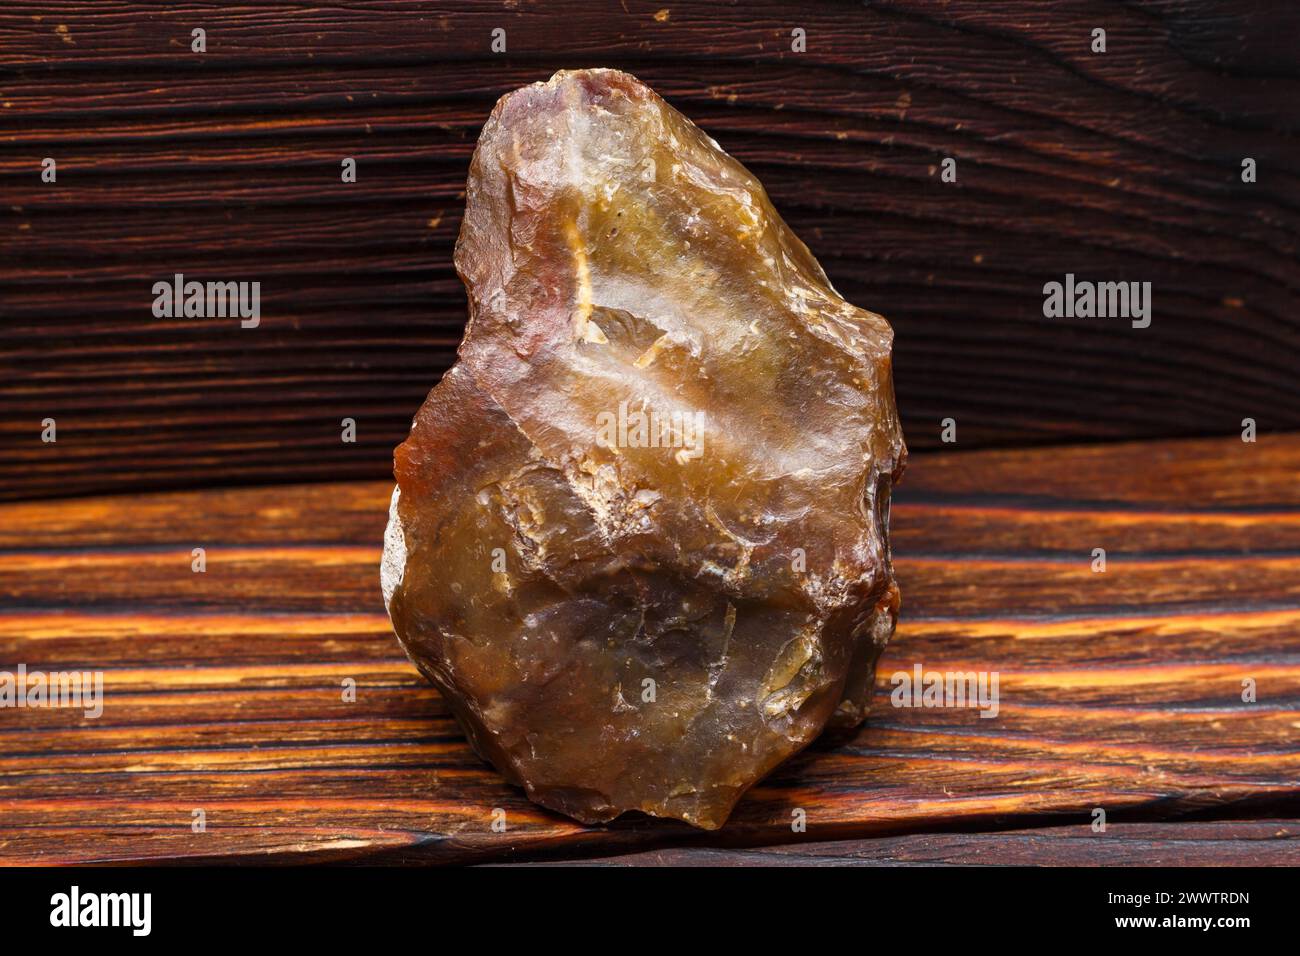 Stone scraper made of red-yellow chalcedony, Stone Age tool Stock Photo